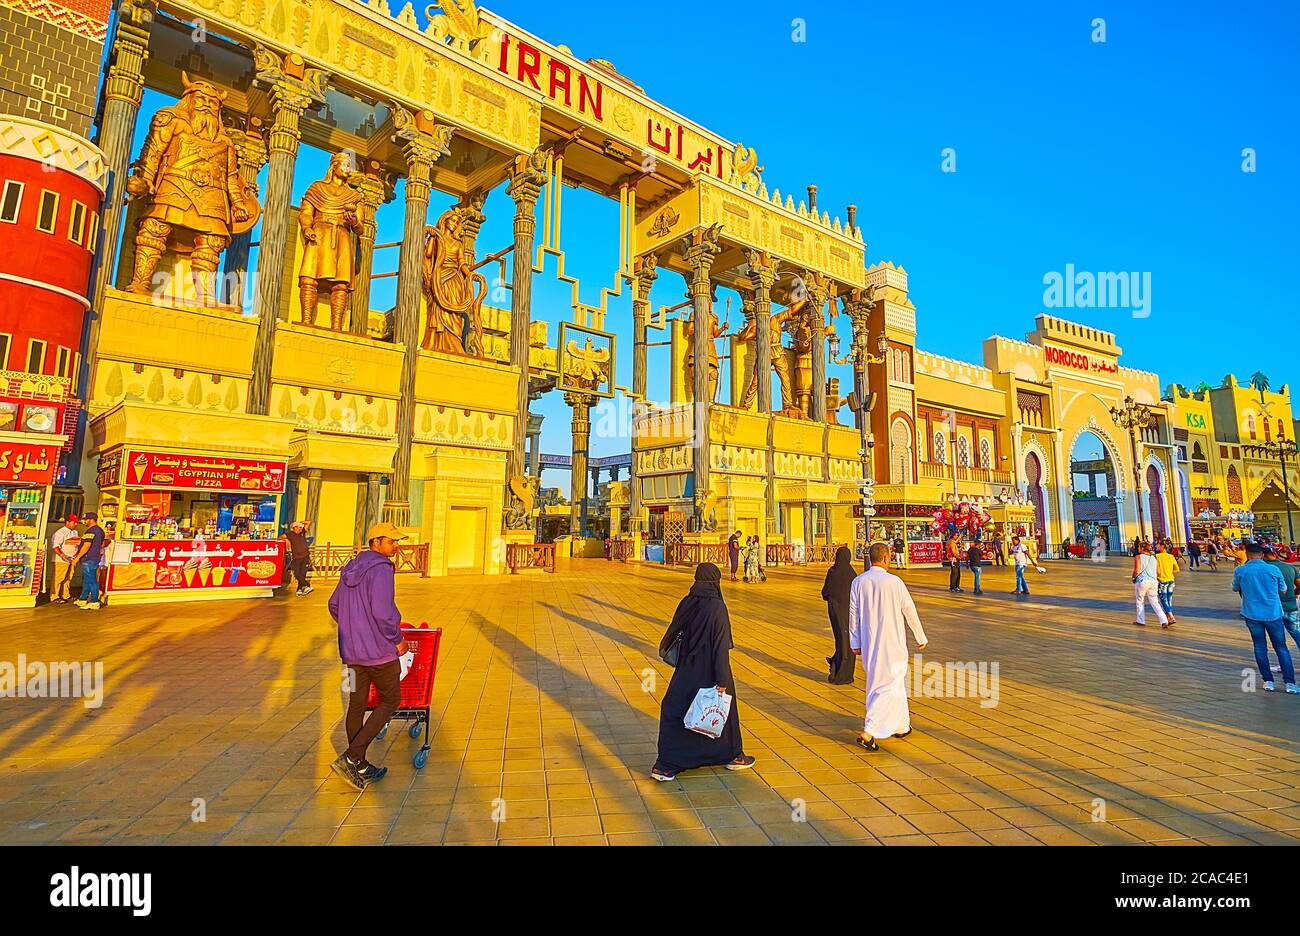 DUBAI, UAE - MARCH 5, 2020: The promenade of Global Village Dubai with pavilion of Iran, decorated with large sculptures, columns and reliefs in Persi Stock Photo